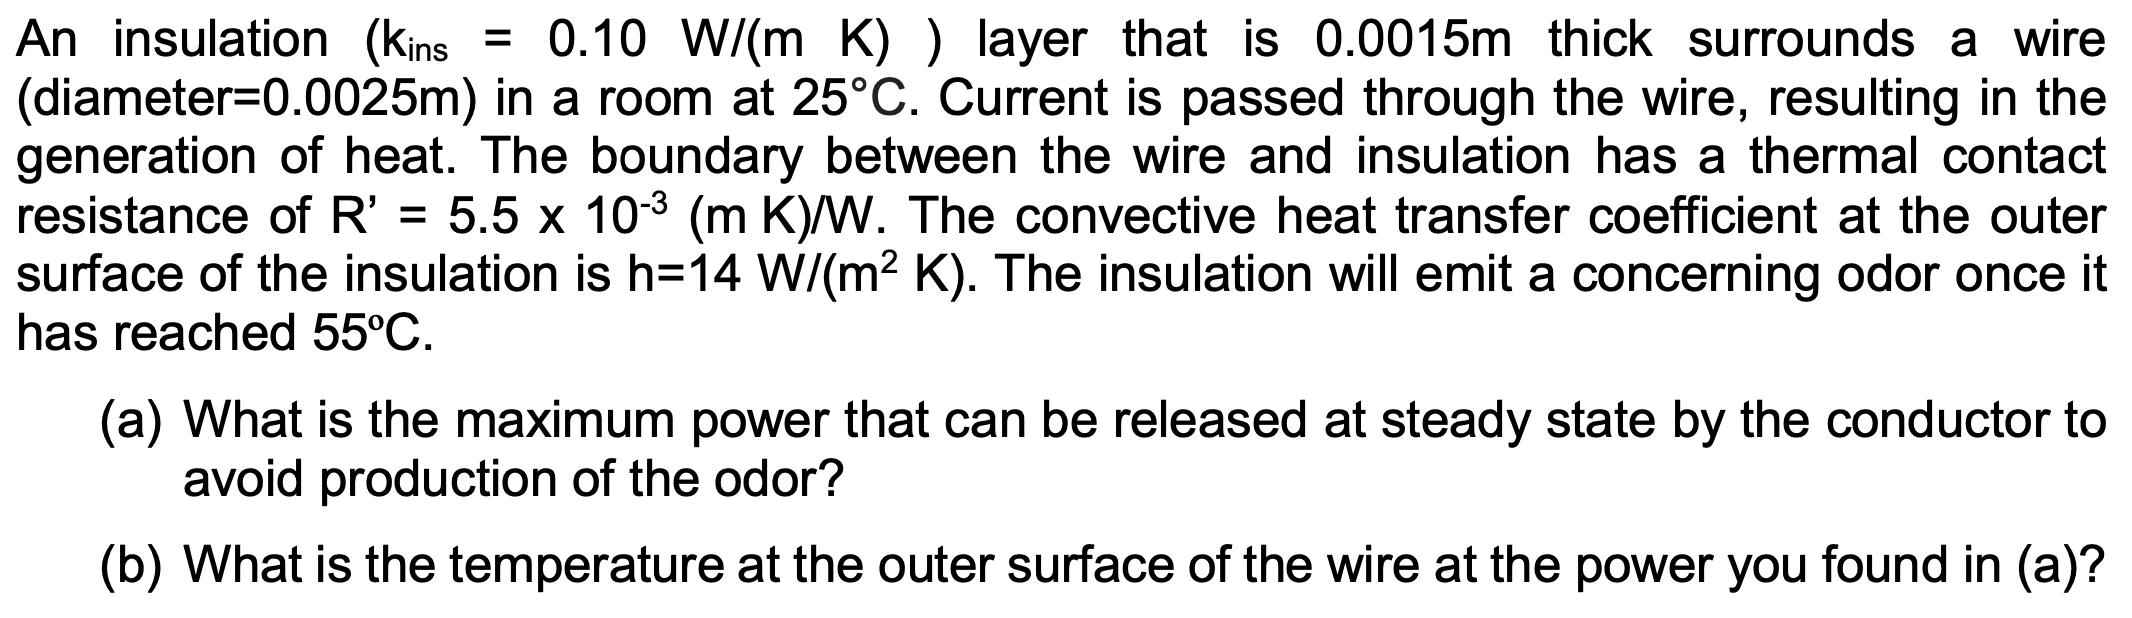 An insulation (Kins = 0.10 W/(m K) ) layer that is 0.0015m thick surrounds a wire (diameter=0.0025m) in a